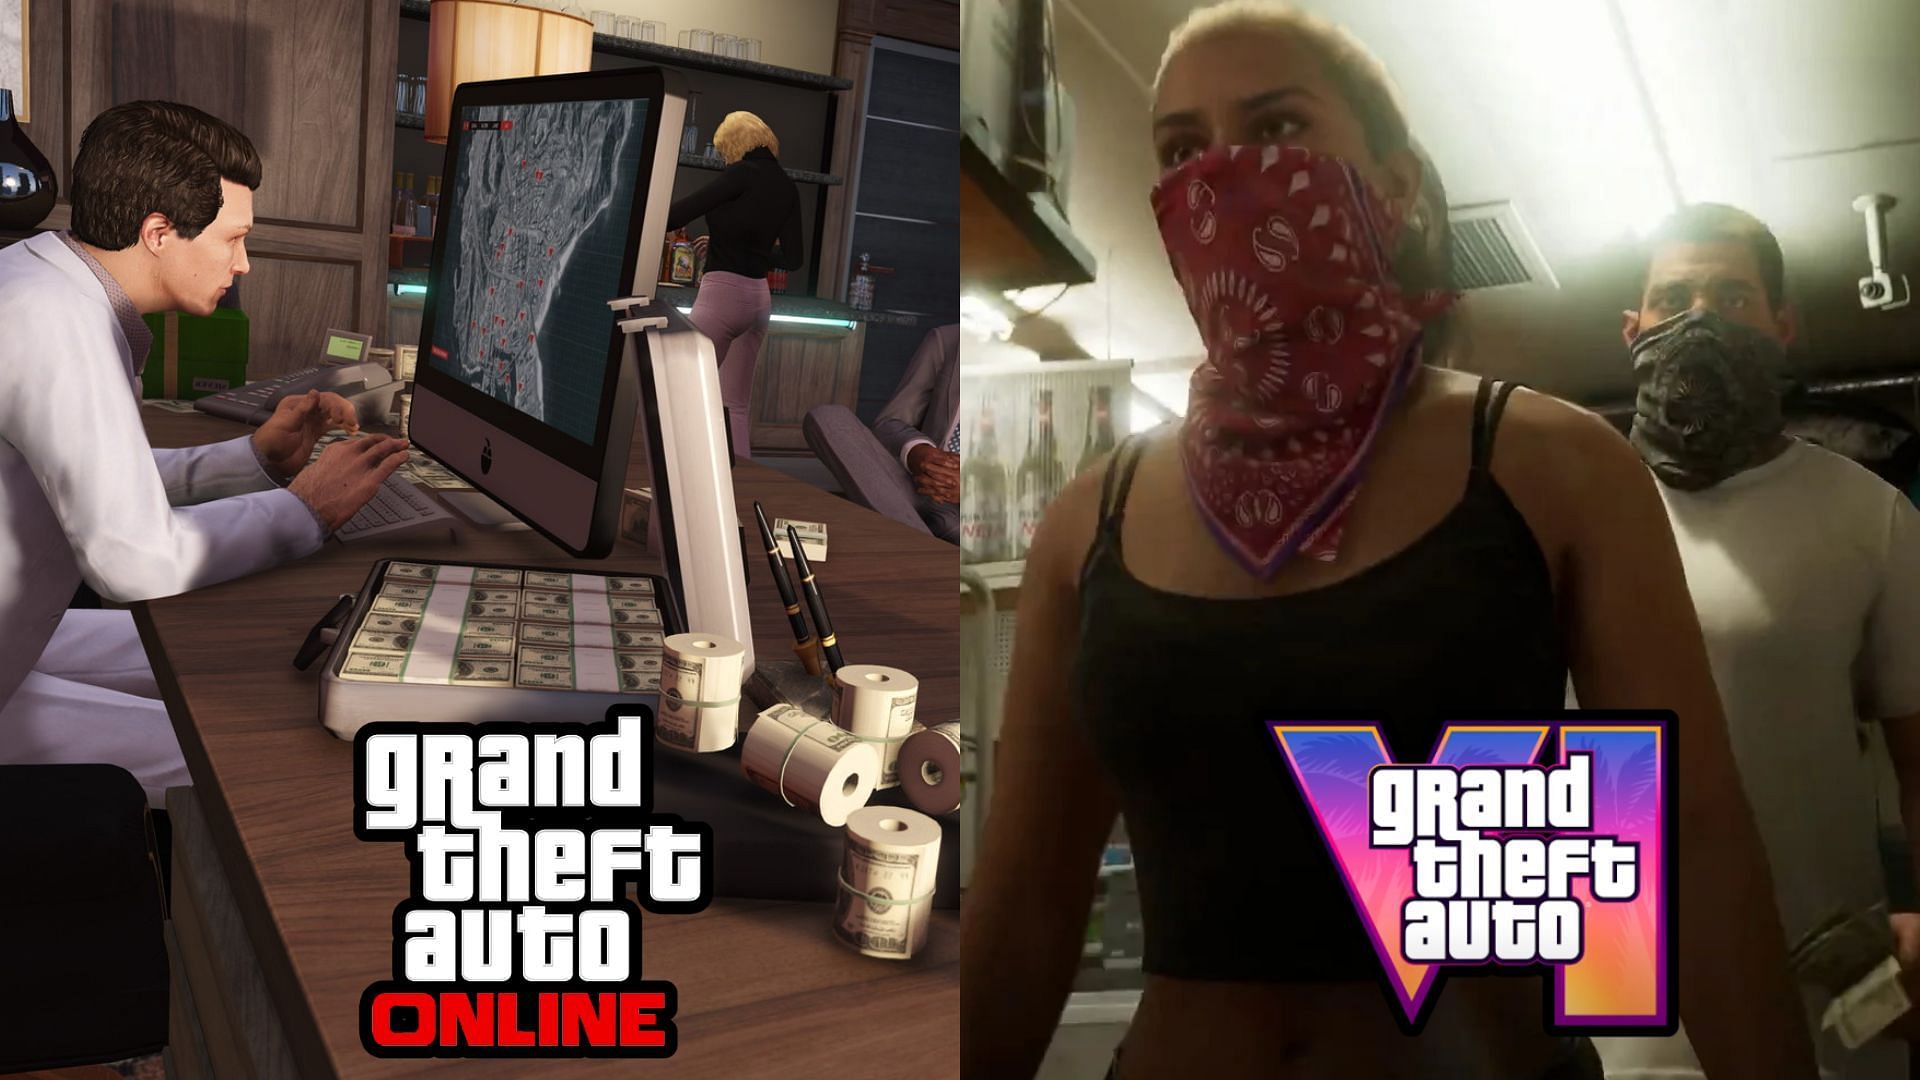 GTA Online features that could return in GTA 6